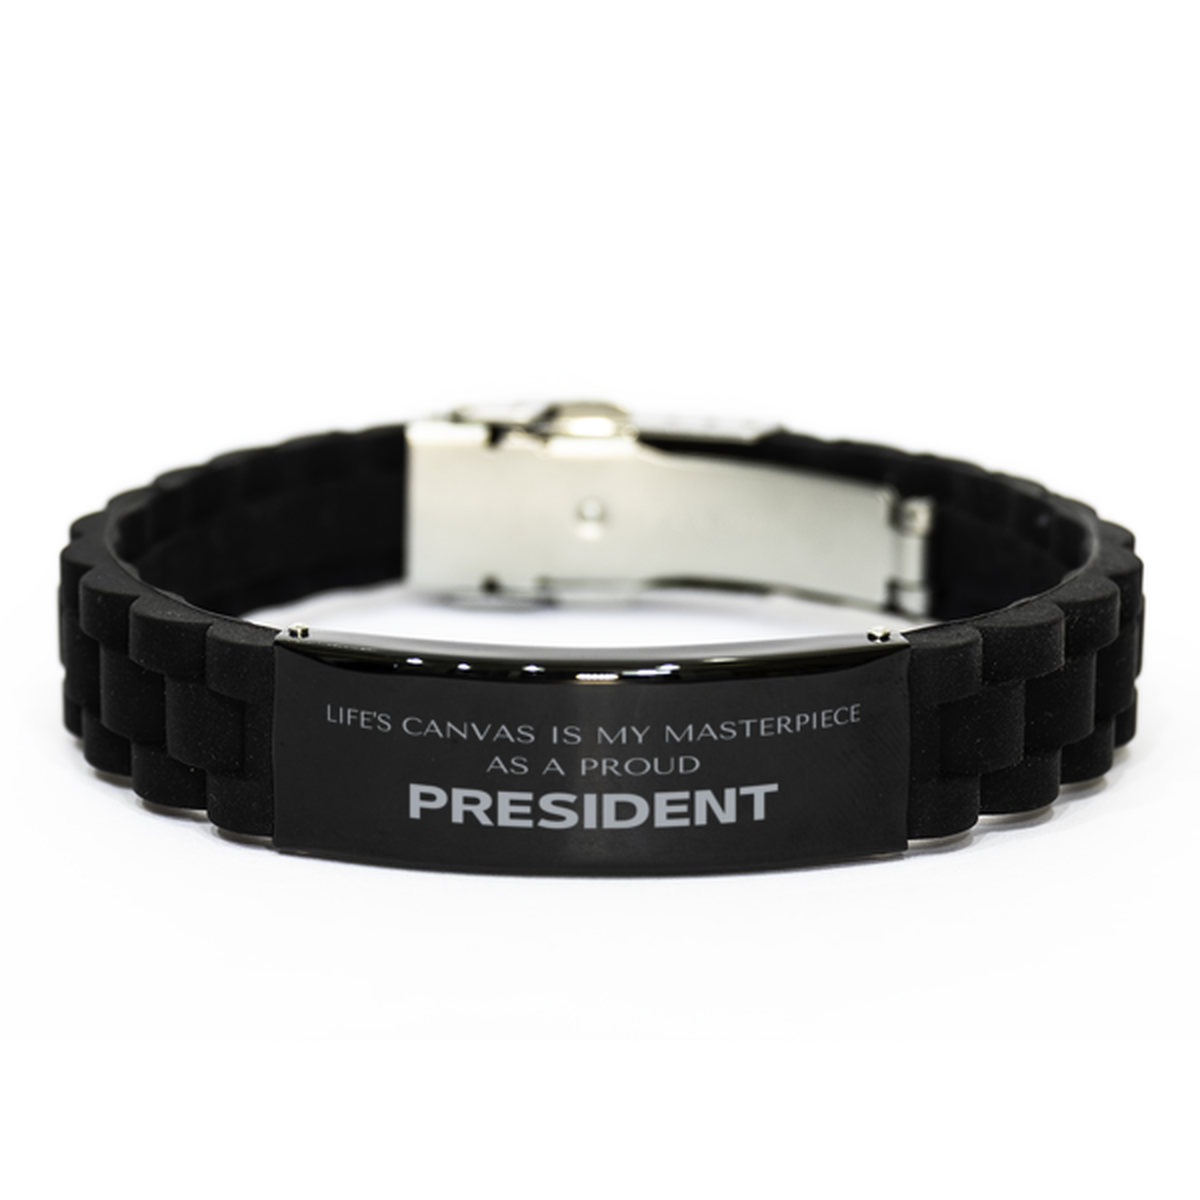 Proud President Gifts, Life's canvas is my masterpiece, Epic Birthday Christmas Unique Black Glidelock Clasp Bracelet For President, Coworkers, Men, Women, Friends